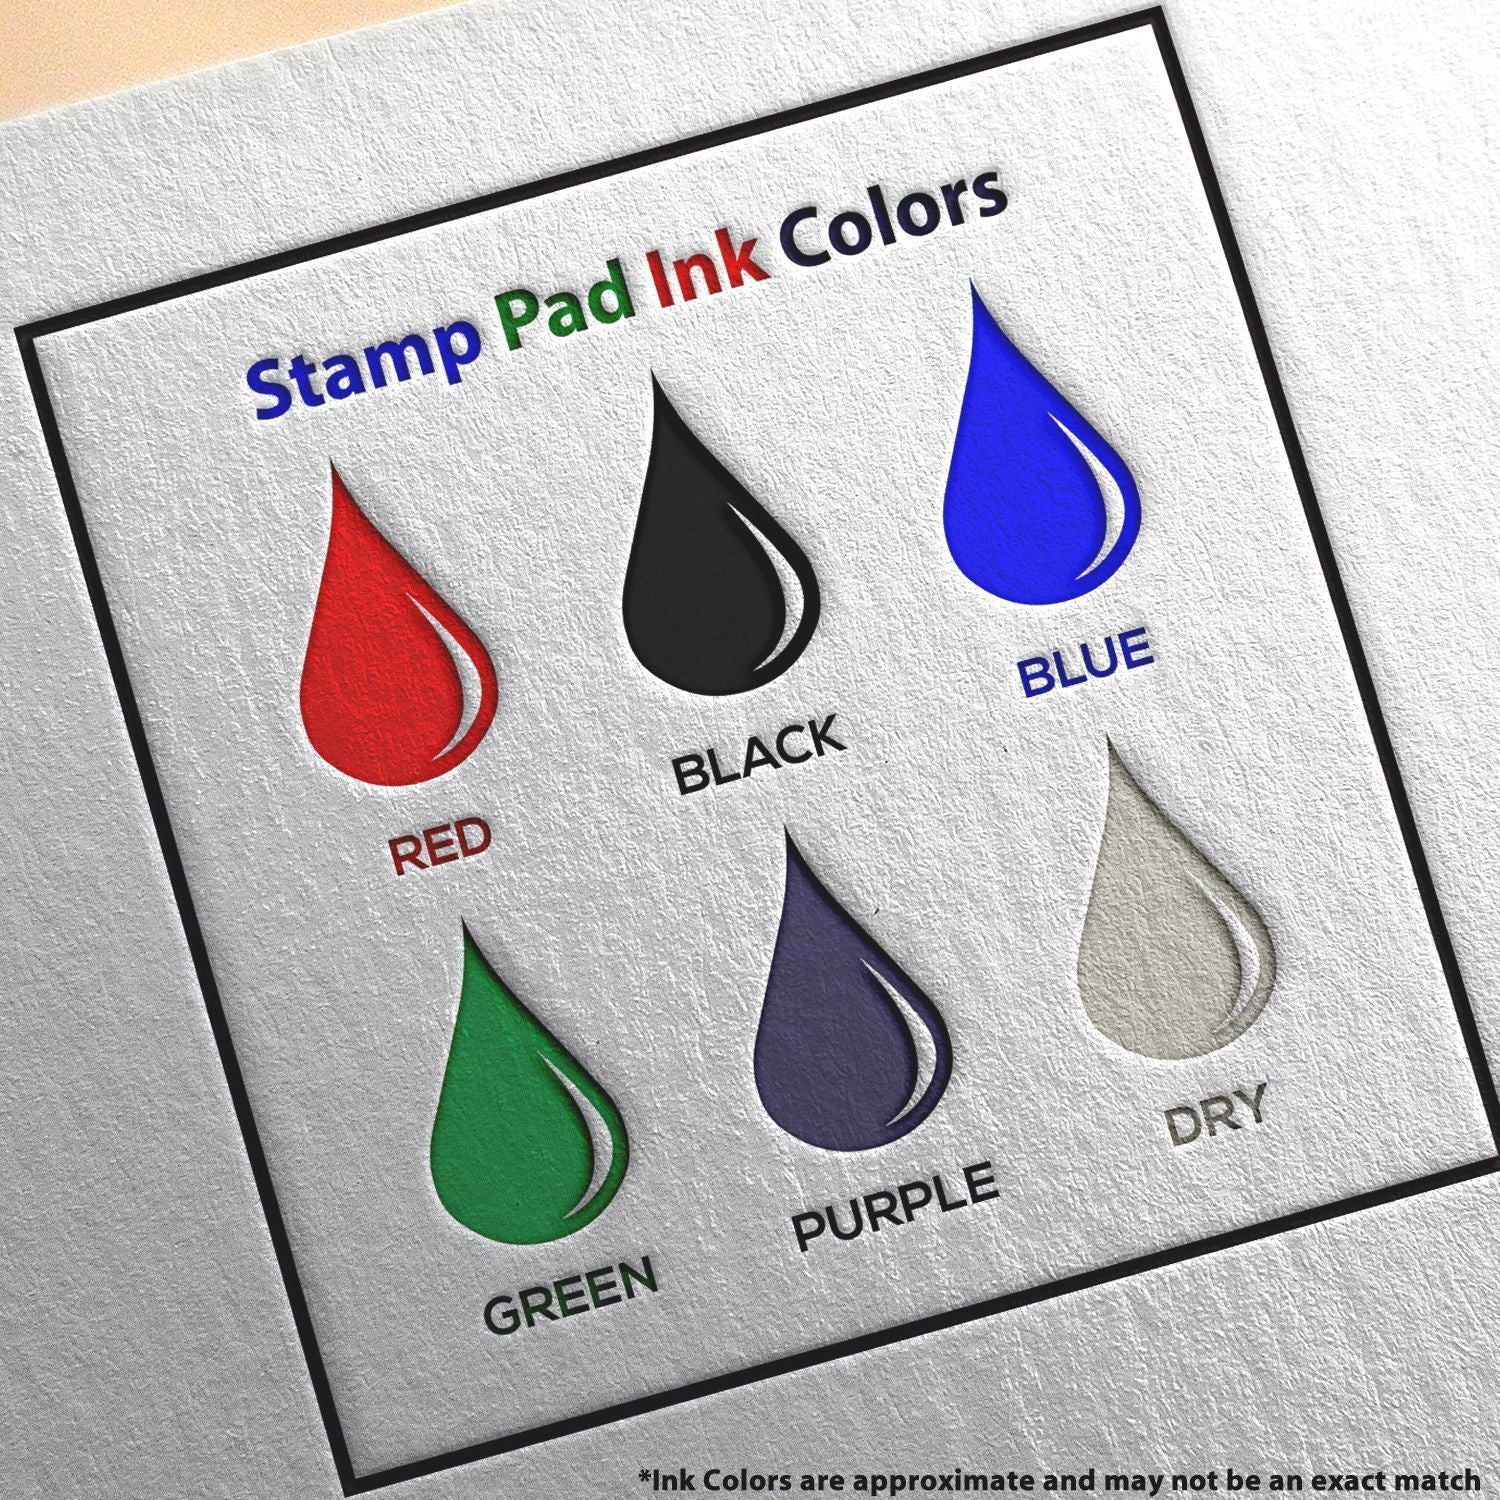 One Color Replacement Ink Pad For Hm 6108 E 908 E 918 And Hm 6008 Dry